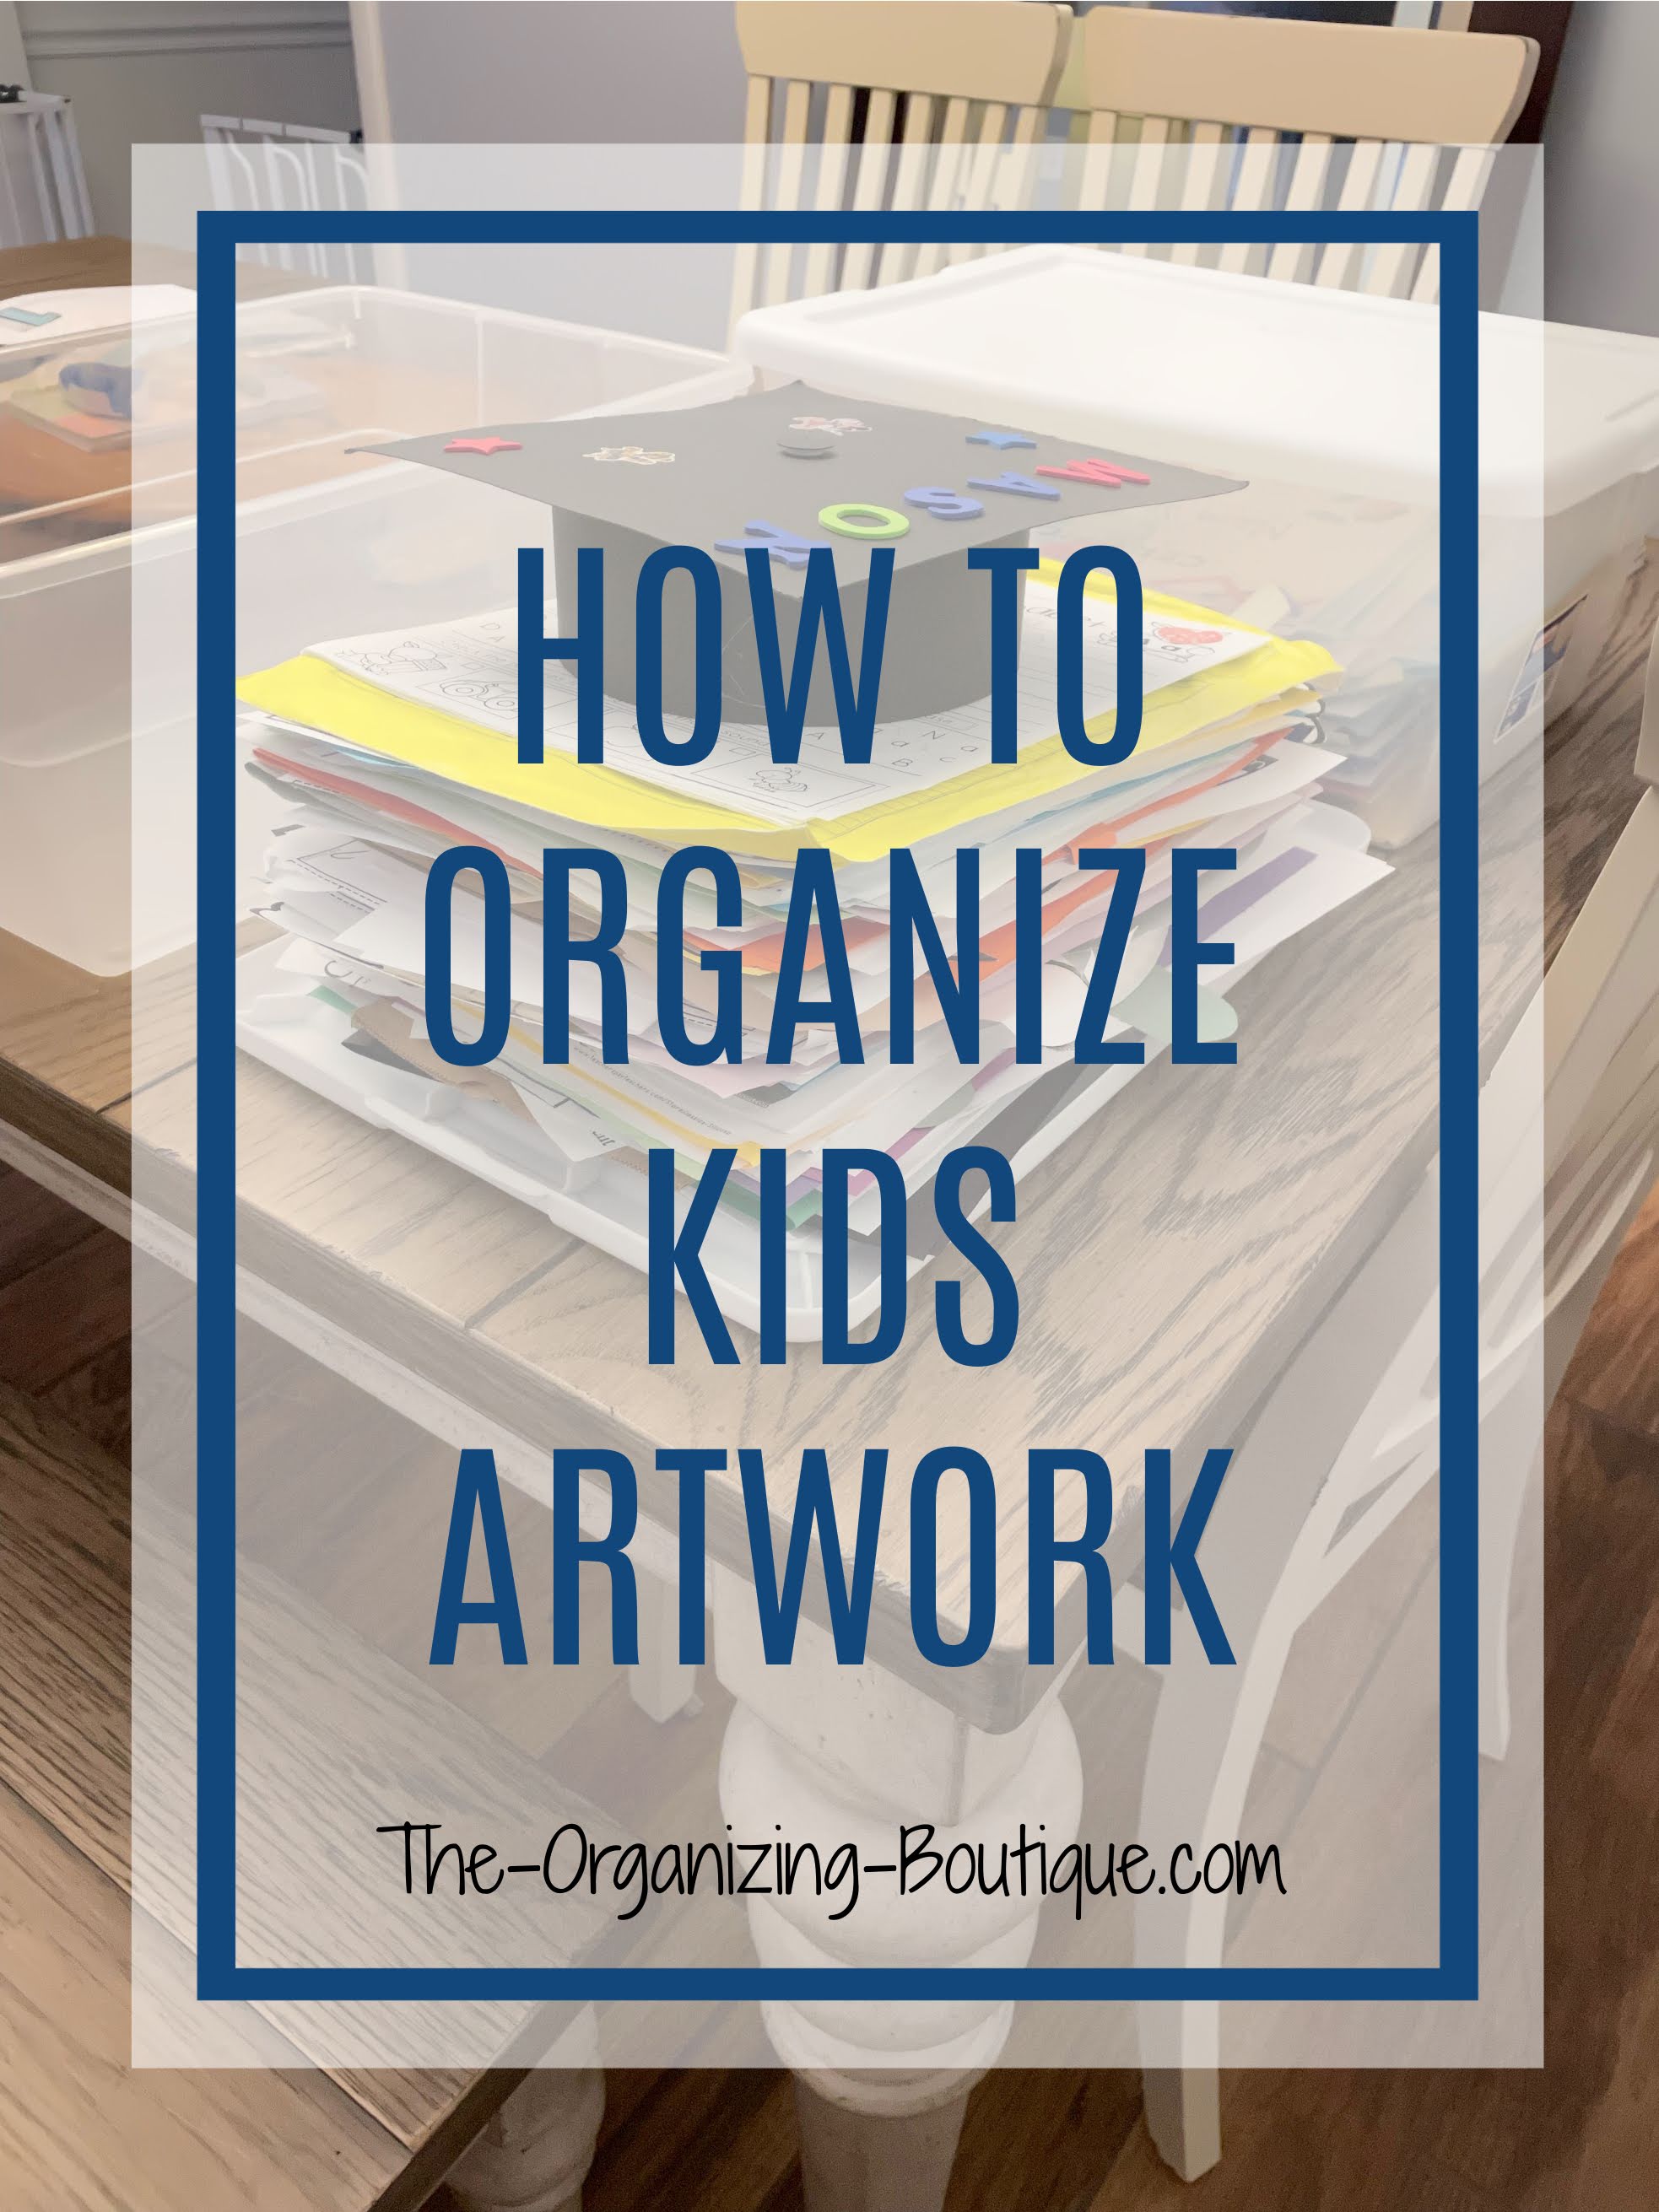 Overwhelmed with childrens drawings and artwork? Here are some fantastic suggestions for storage for kids artwork!